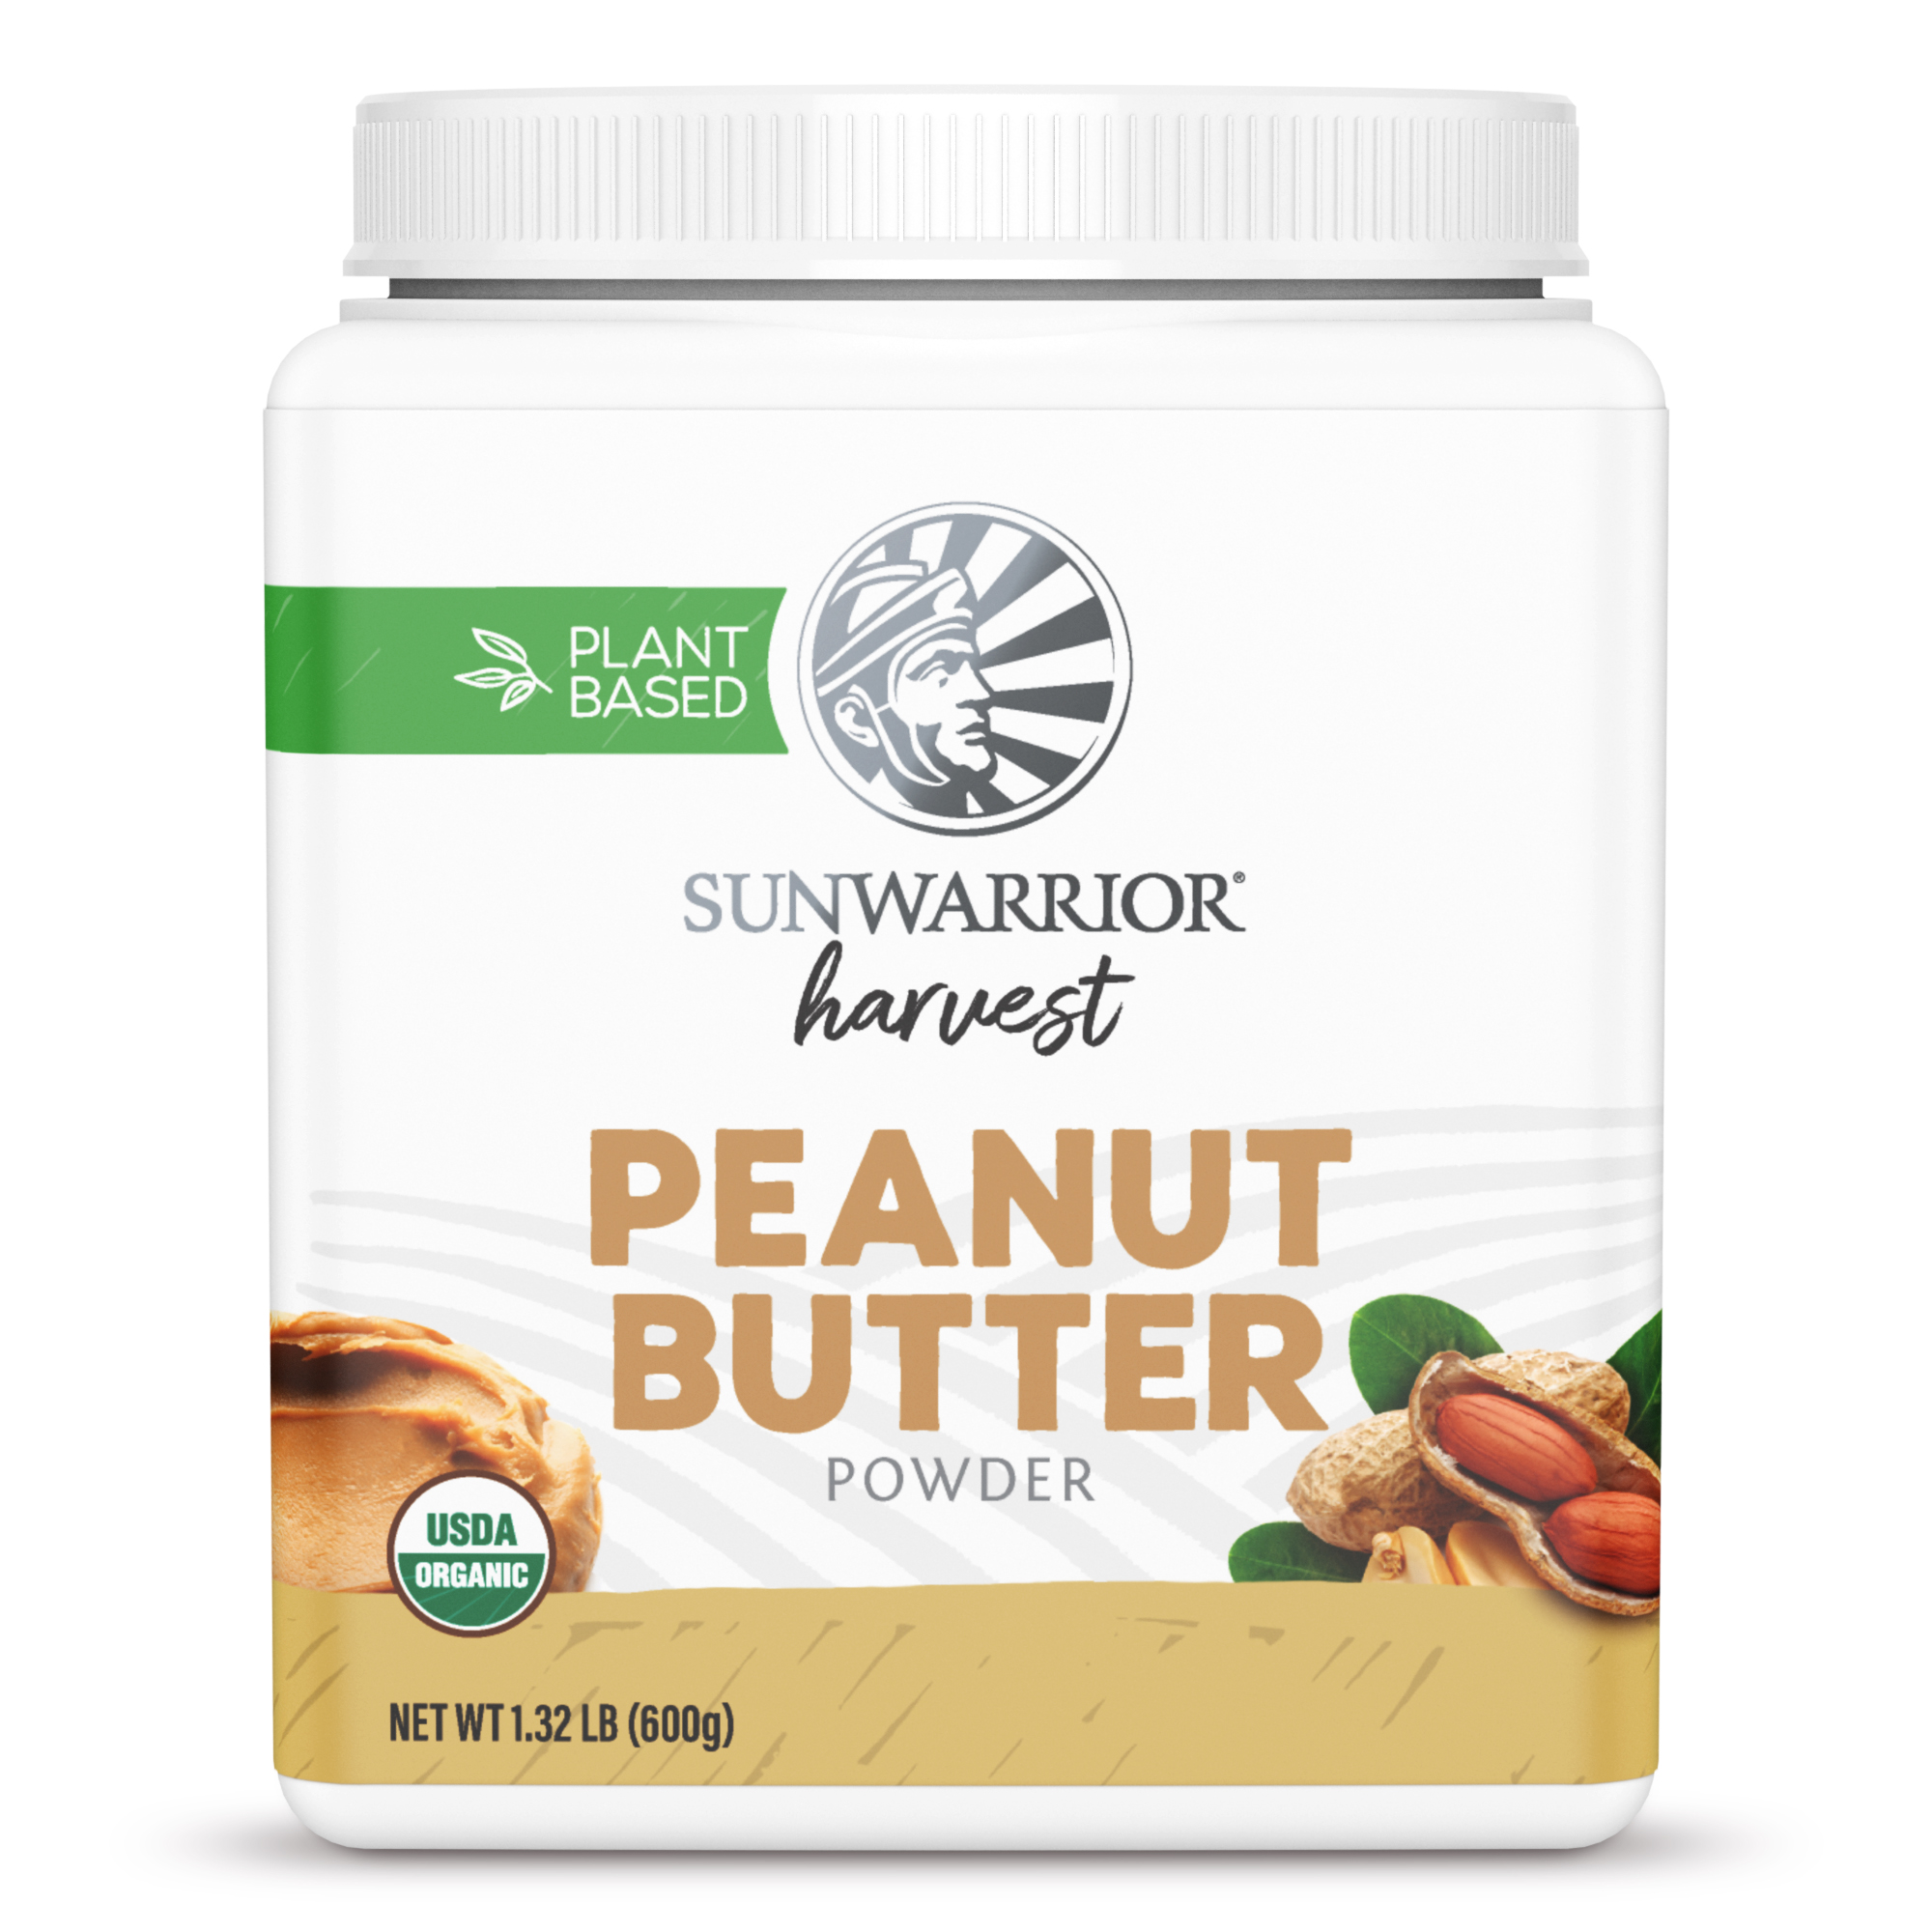 Peanut Butter Powder, Health Food & Products